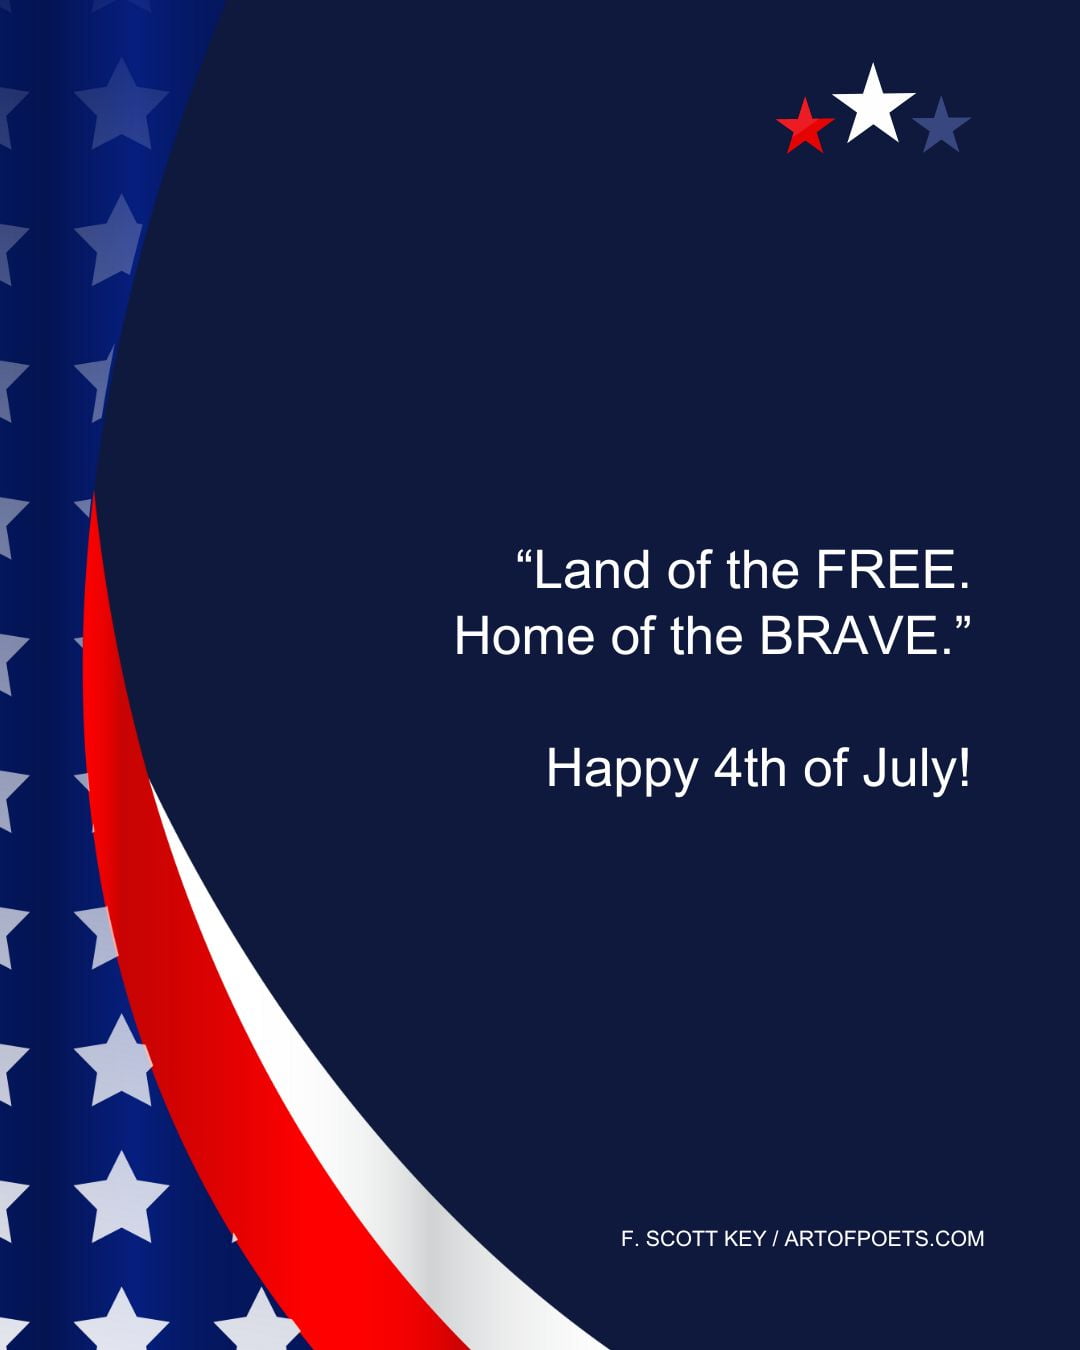 Land of the FREE. Home of the BRAVE. Happy 4th of July